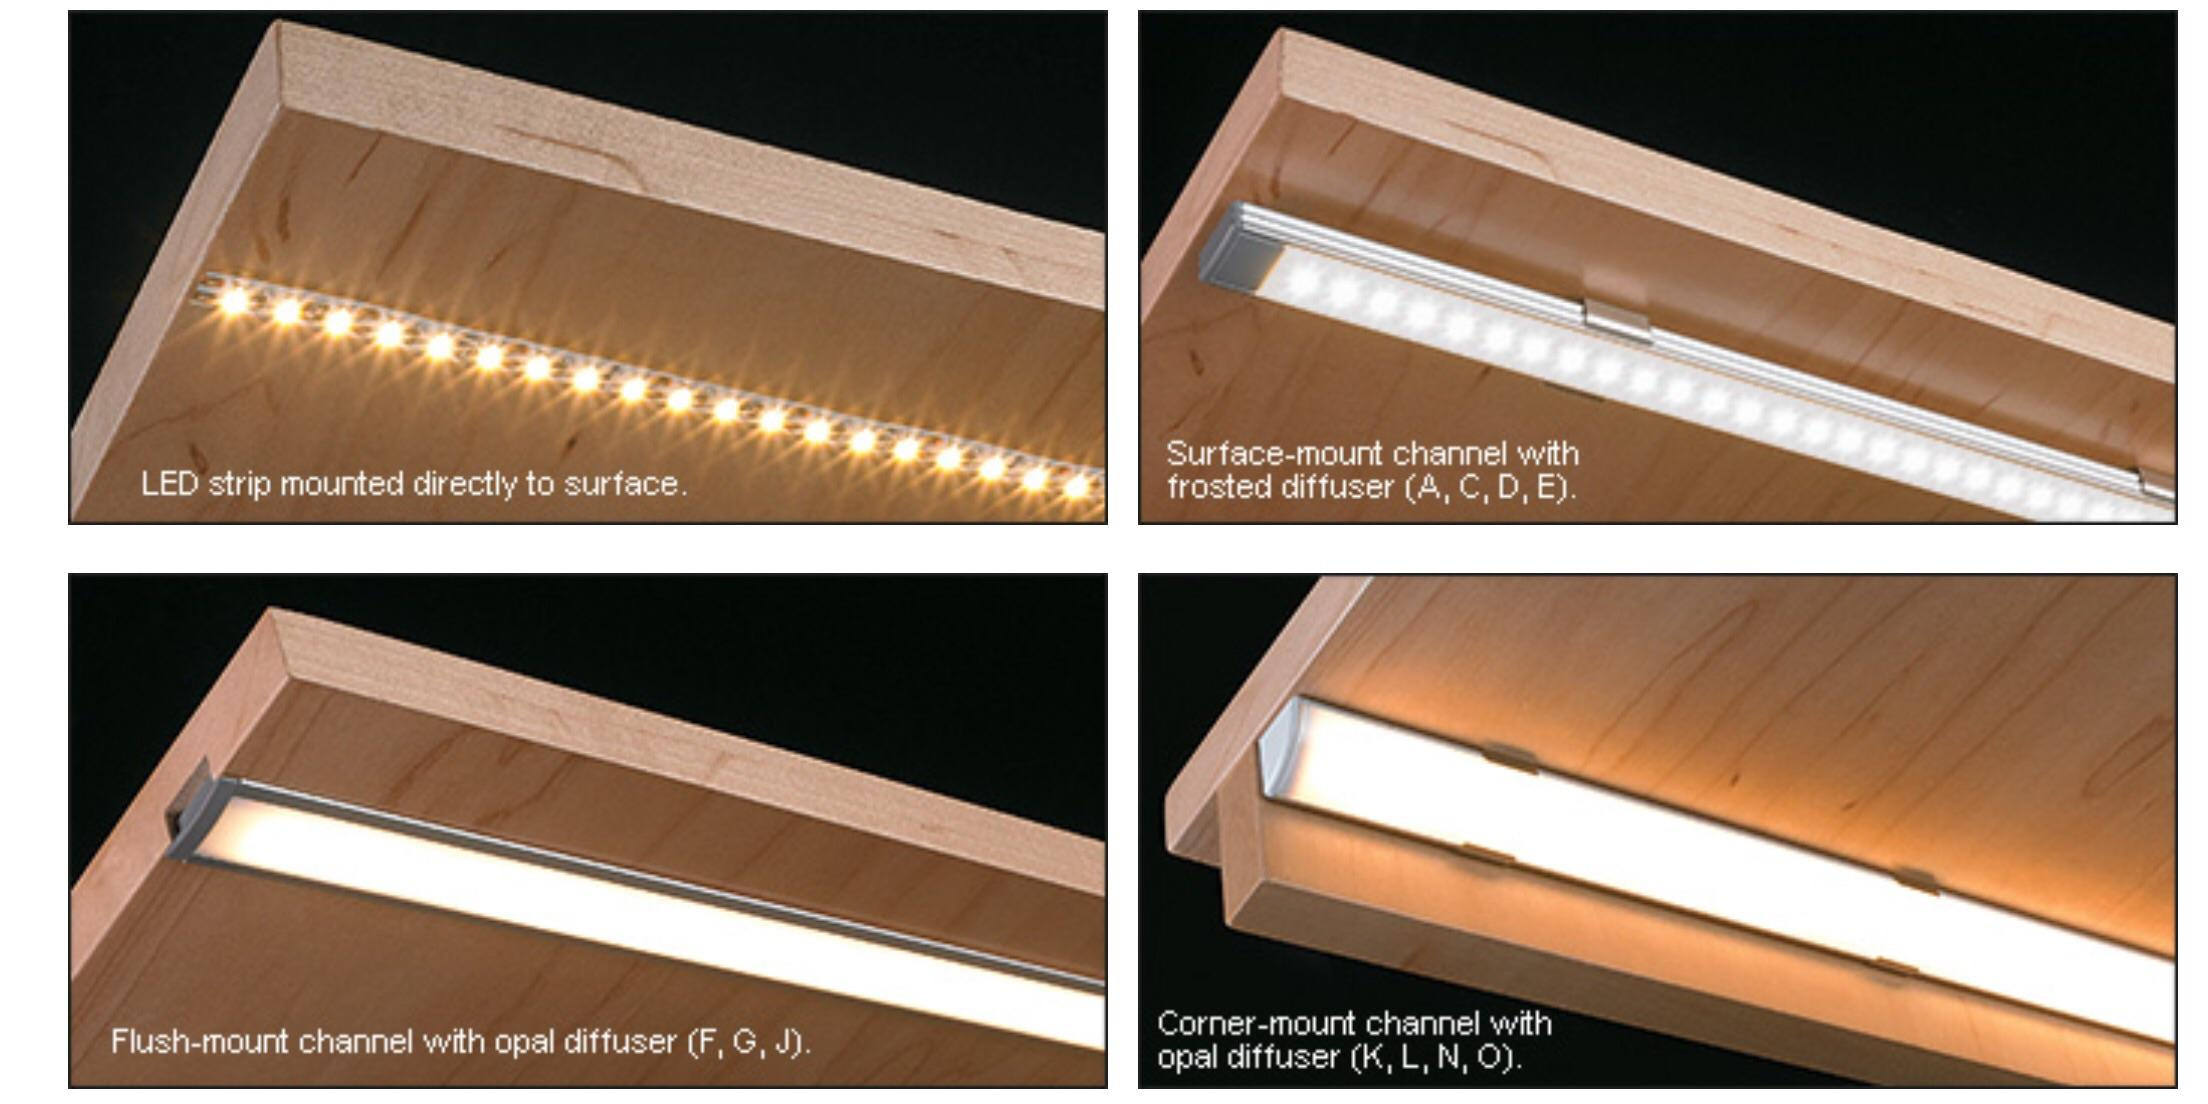 Led Strip Diffusers